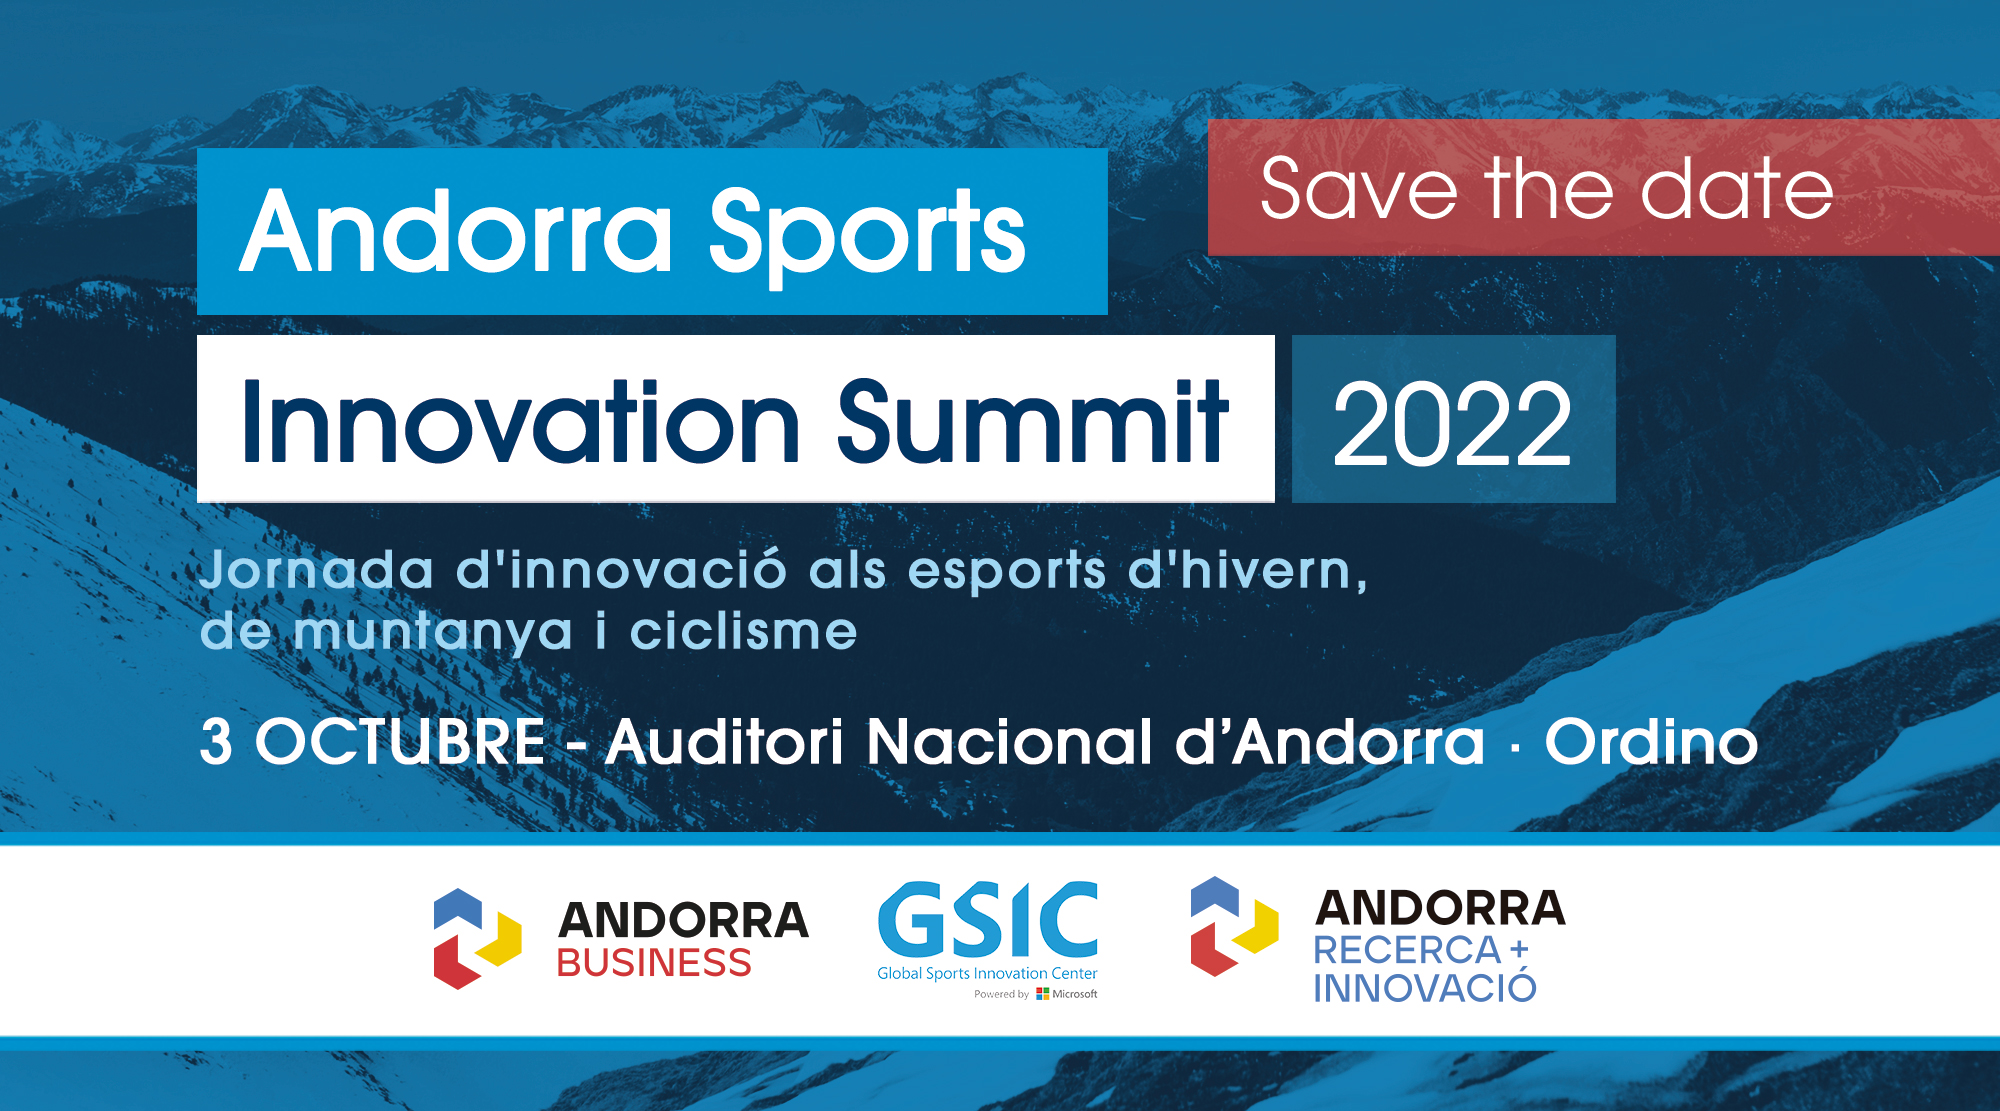 Andorra Sports Innovation Summit 2022 - Save the date